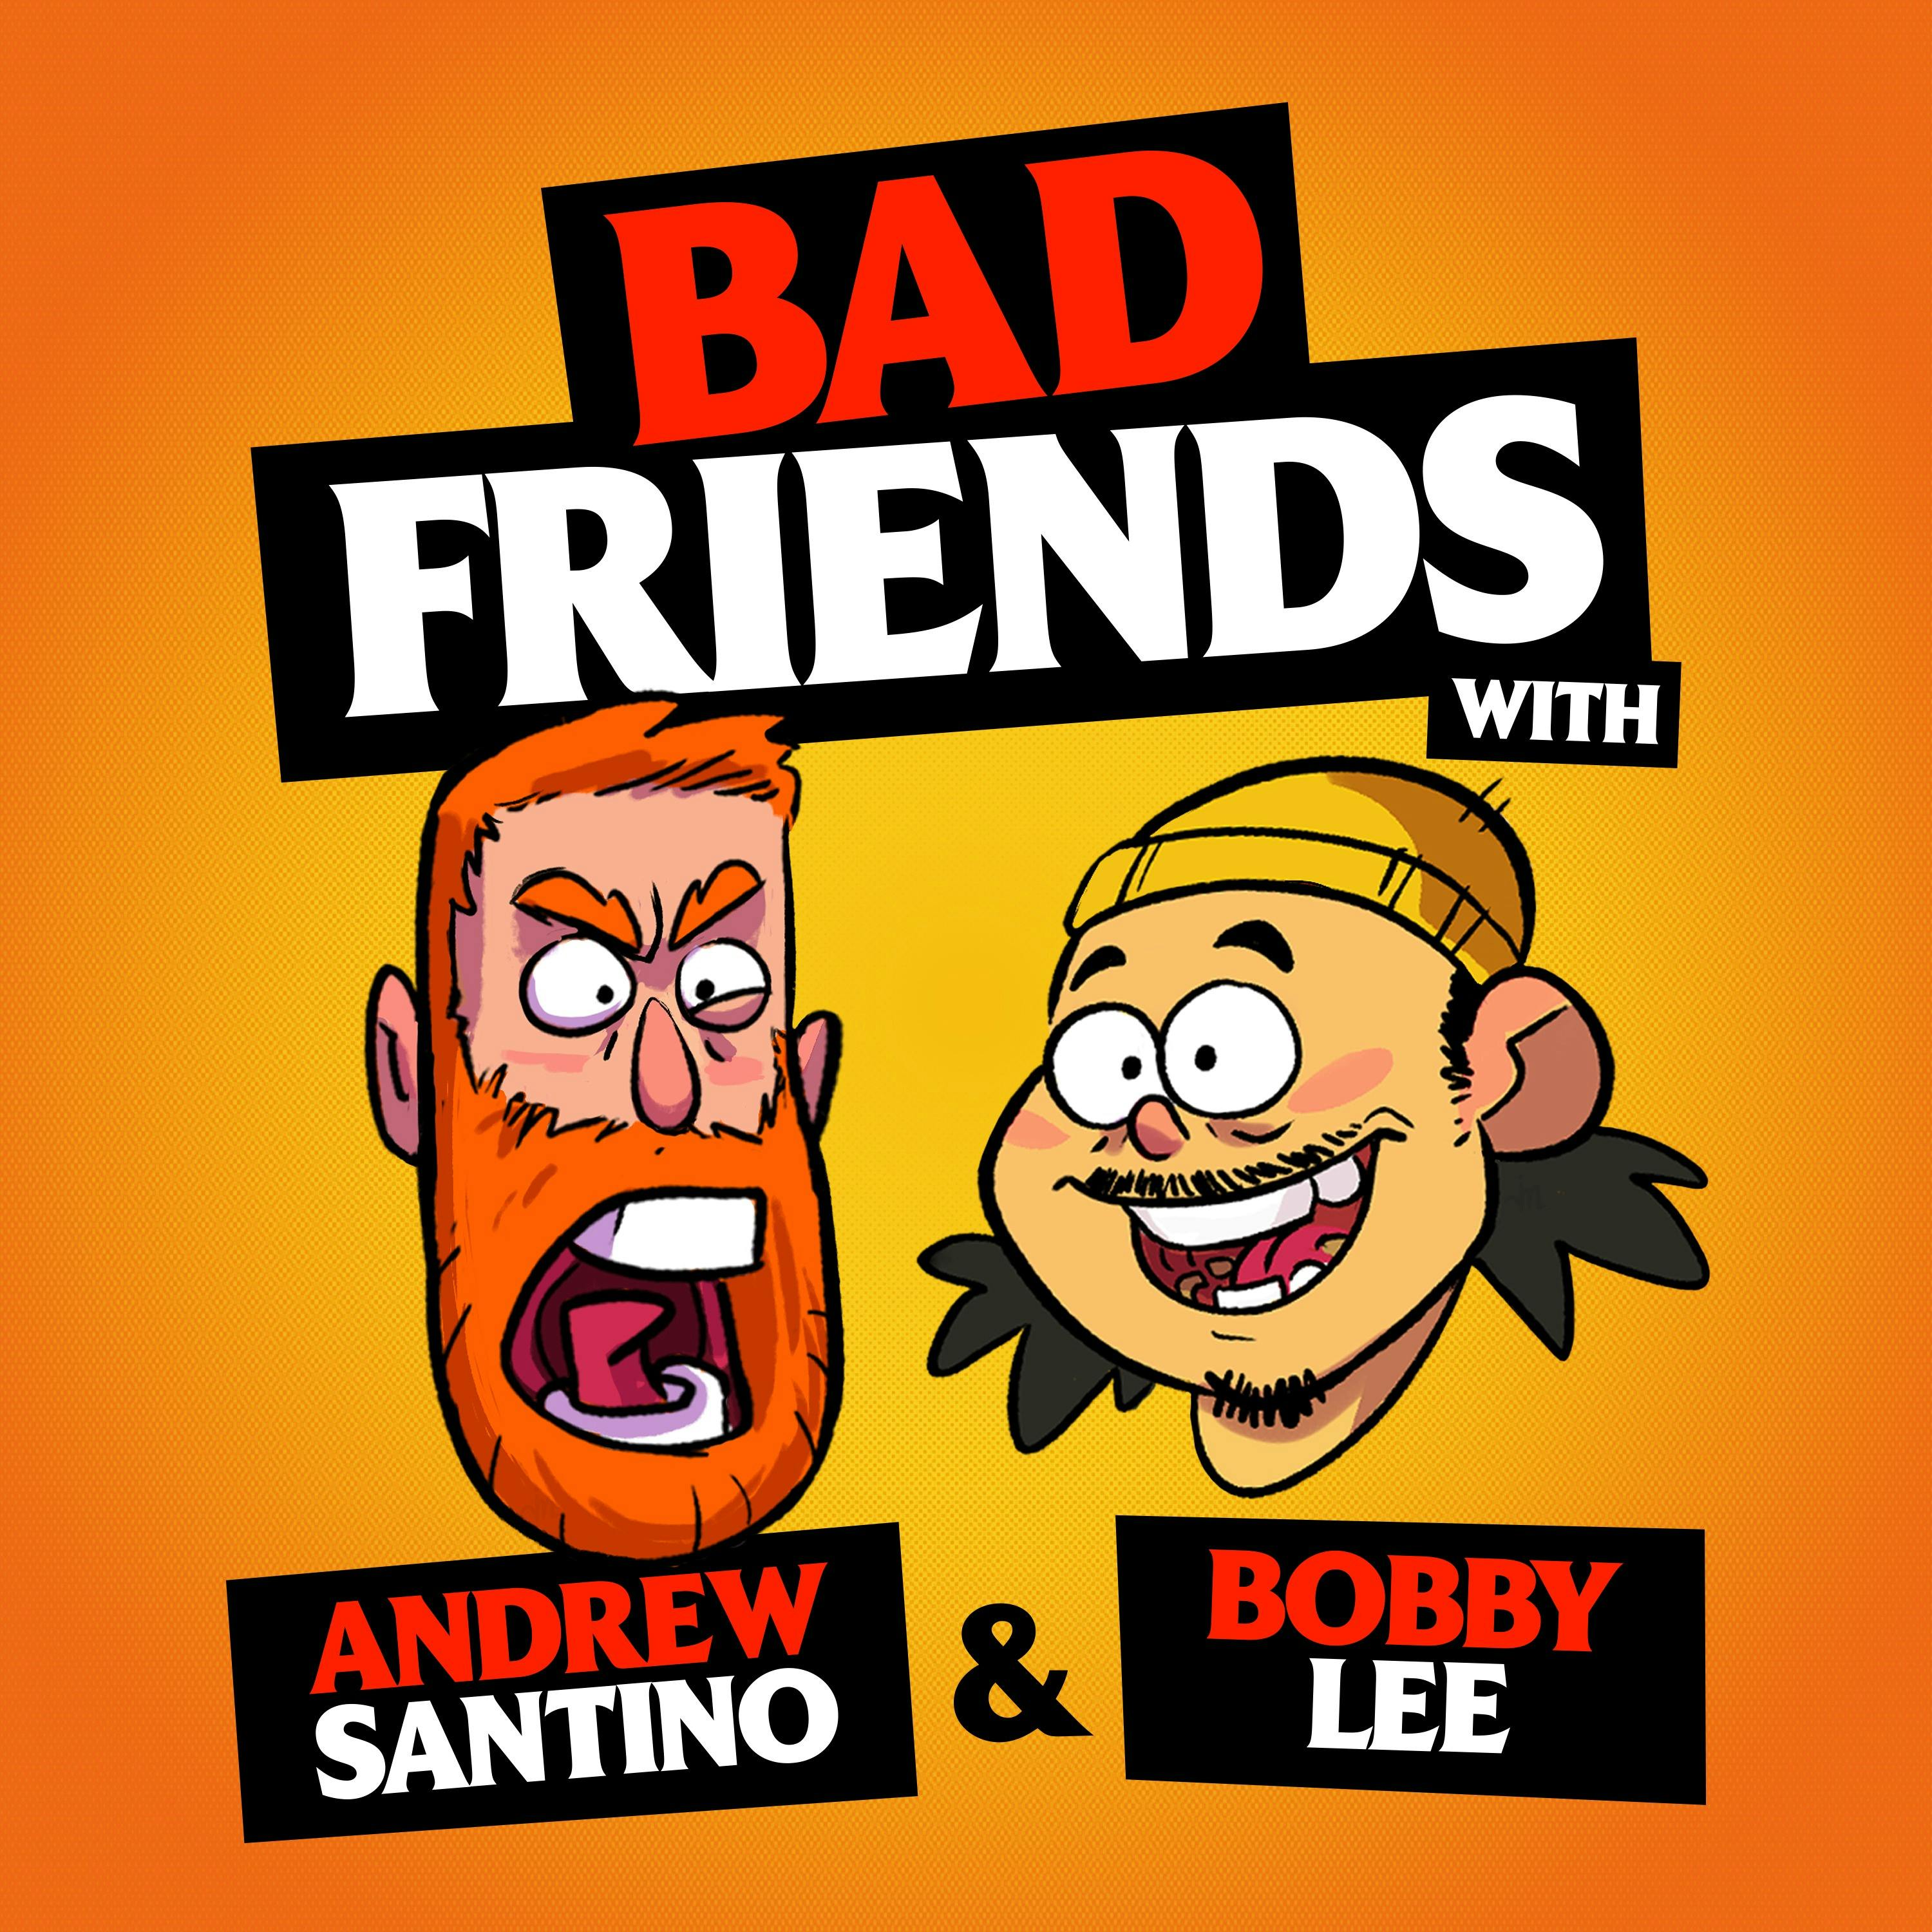 Judge Rudy's Court by Andrew Santino and Bobby Lee